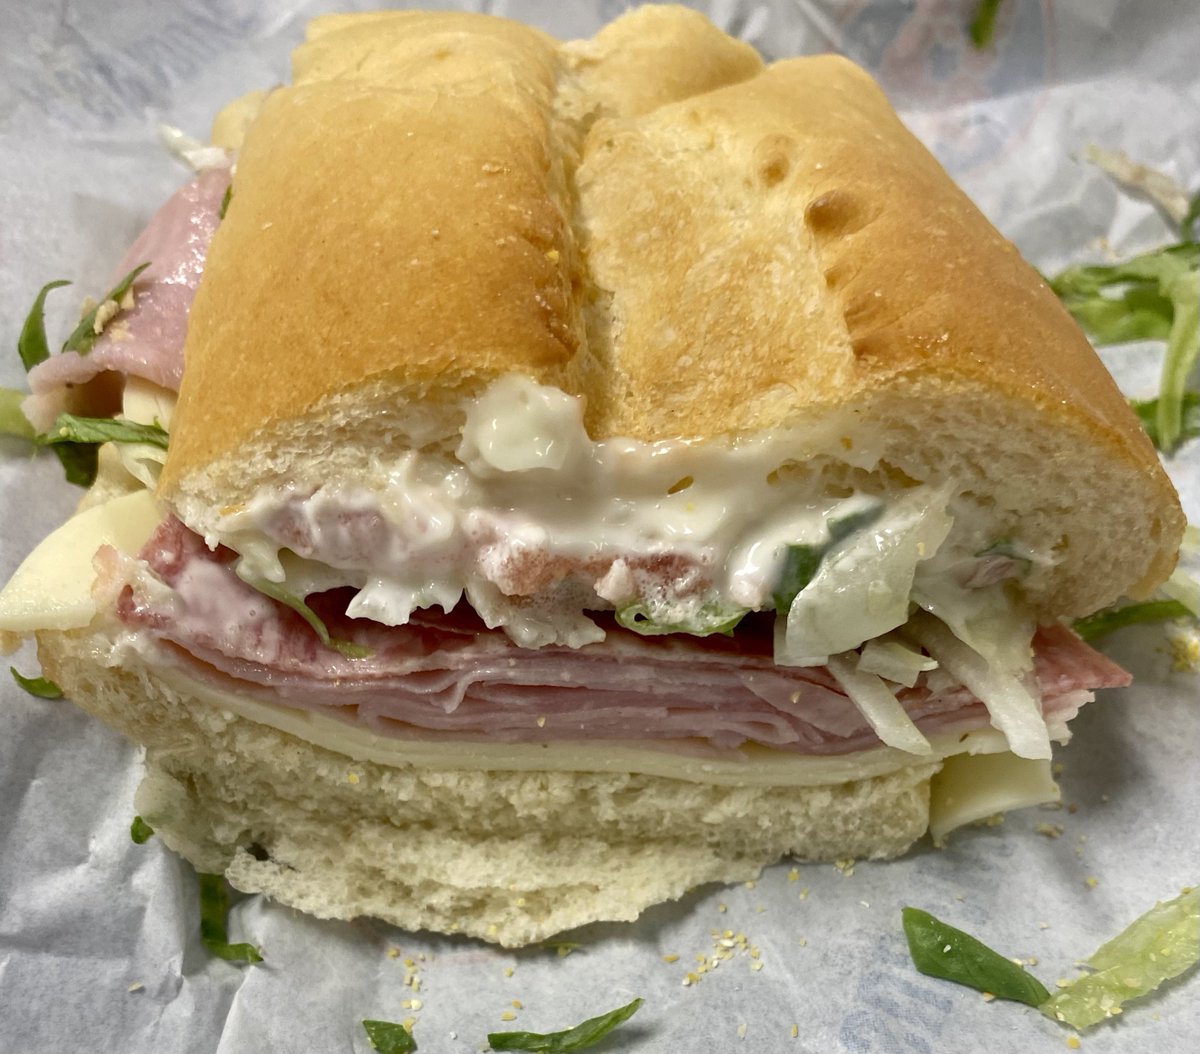 Name one side that goes well with a sub sandwich.